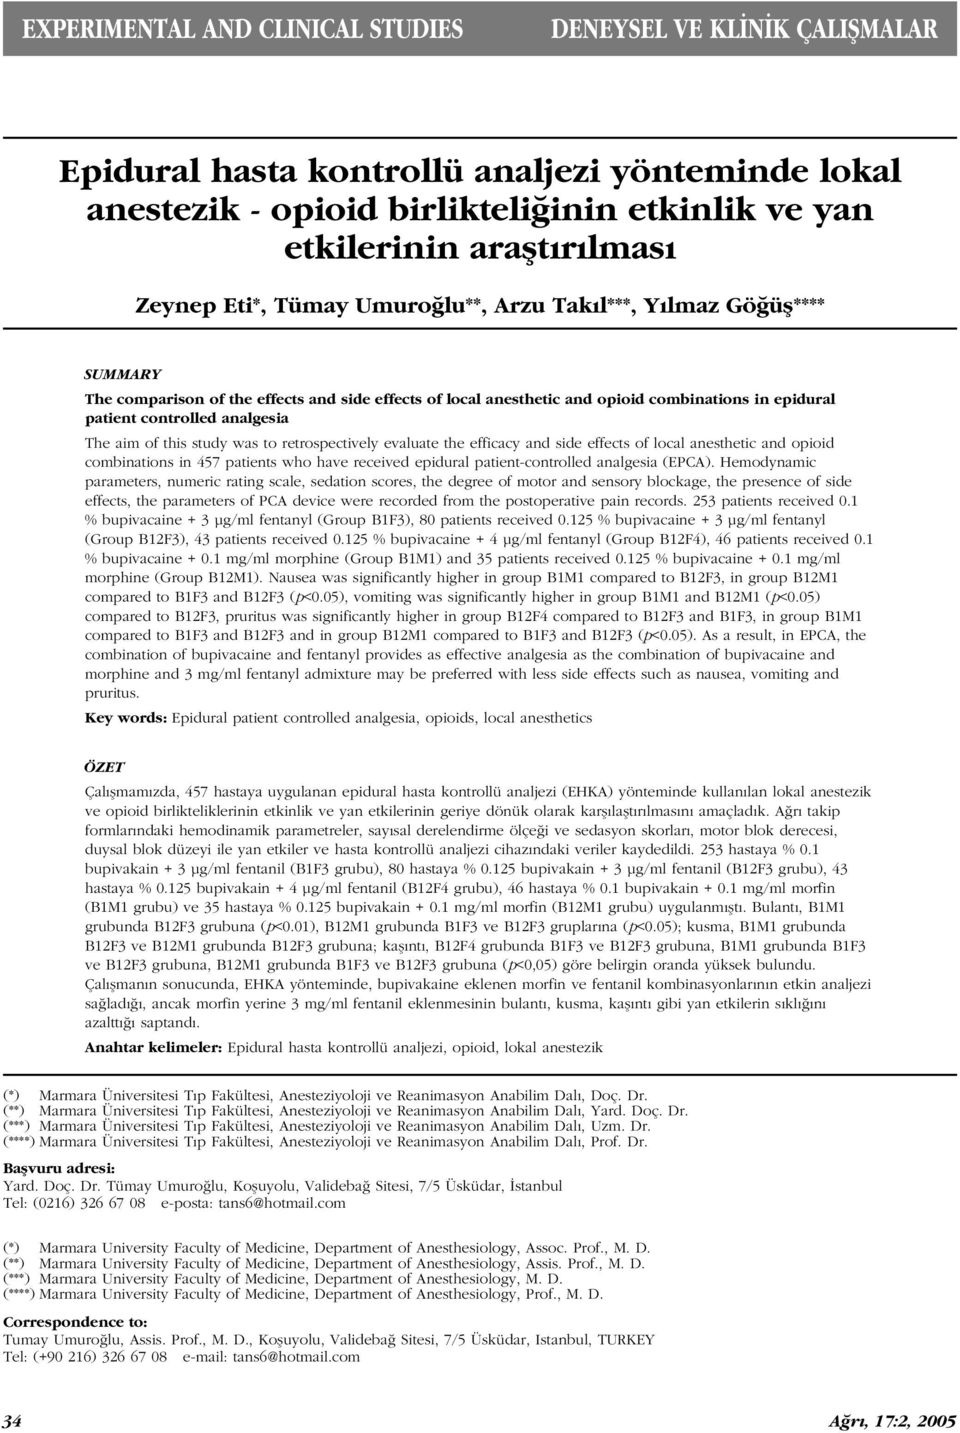 The aim of this study was to retrospectively evaluate the efficacy and side effects of local anesthetic and opioid combinations in 457 patients who have received epidural patient-controlled analgesia